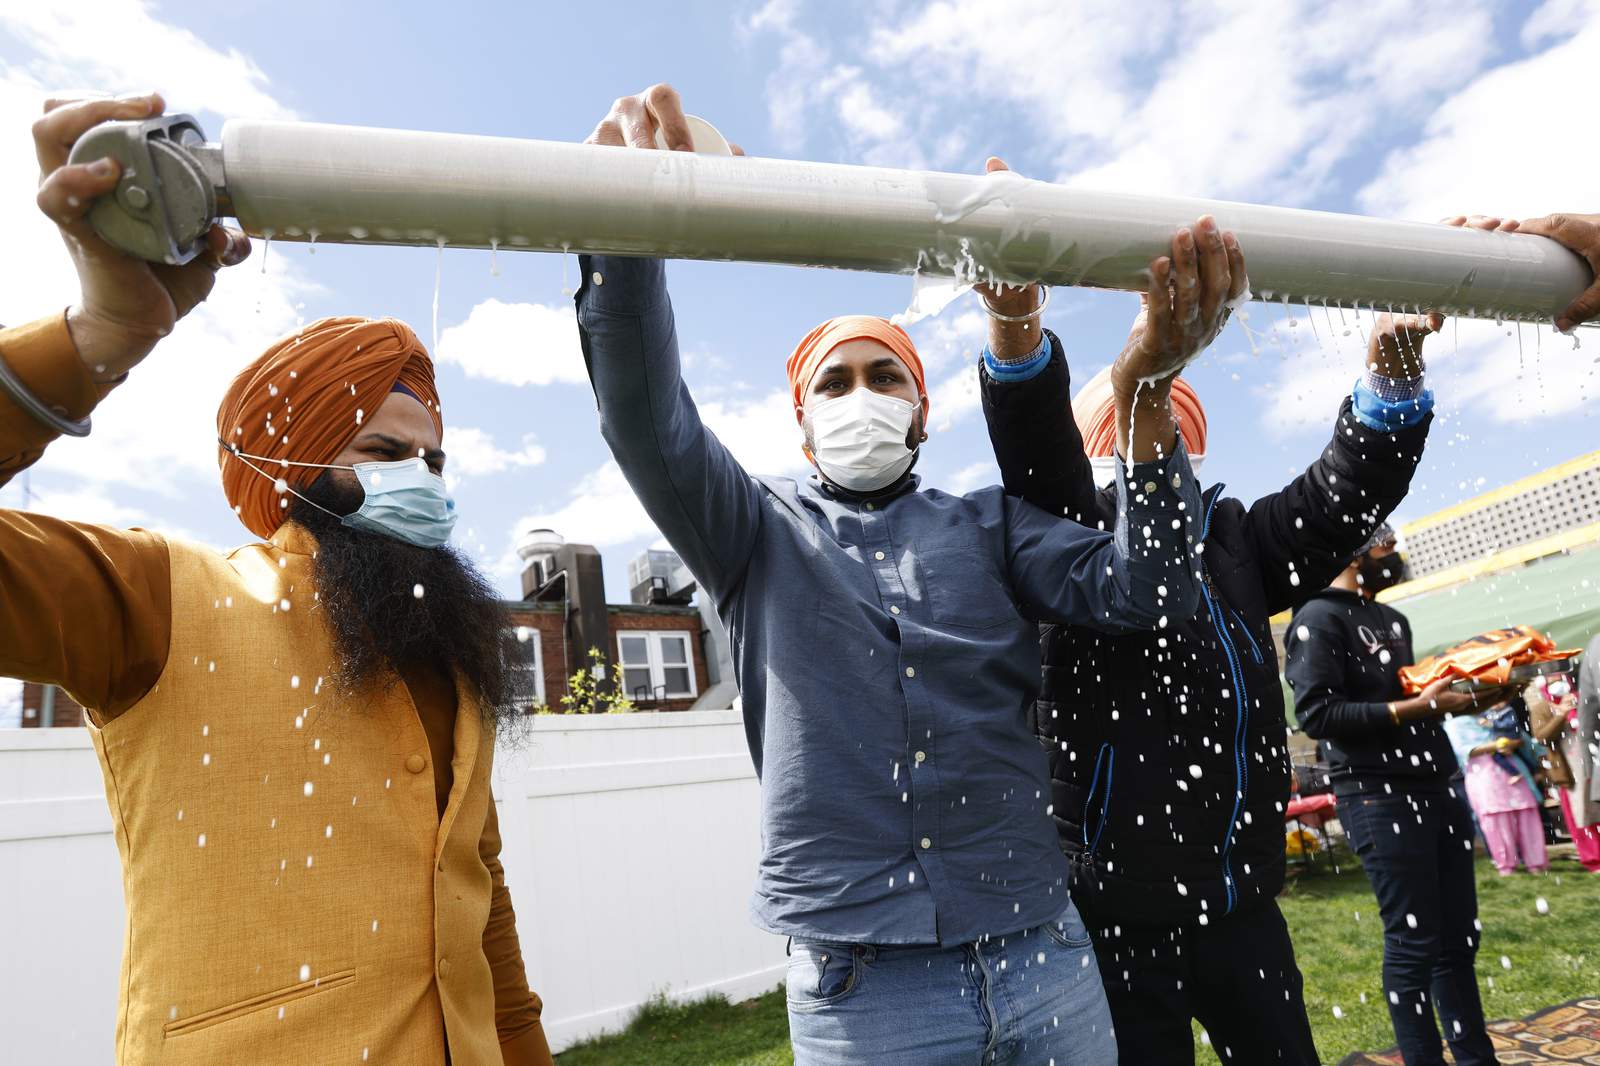 Sikhs mark toned-down holiday amid continuing virus concerns